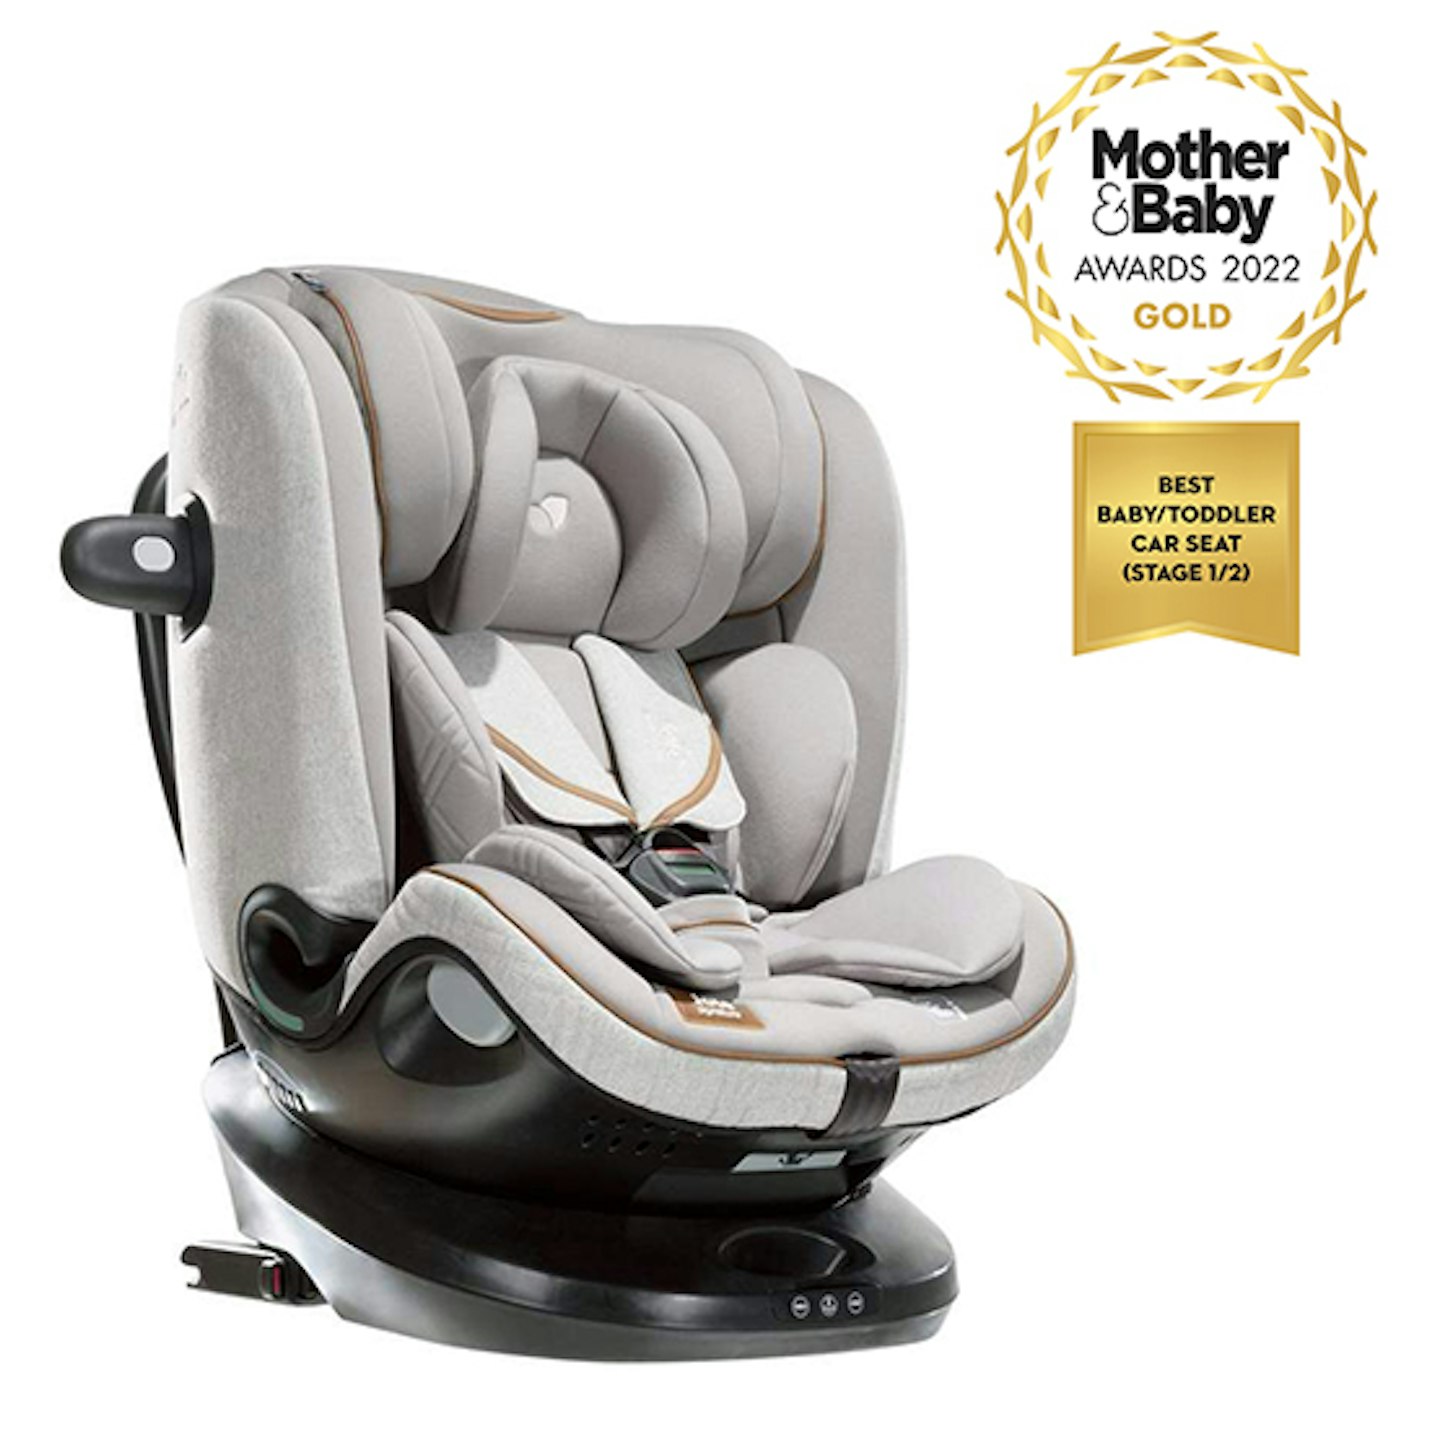 Joie 360 Spin Baby to Toddler Car Seat